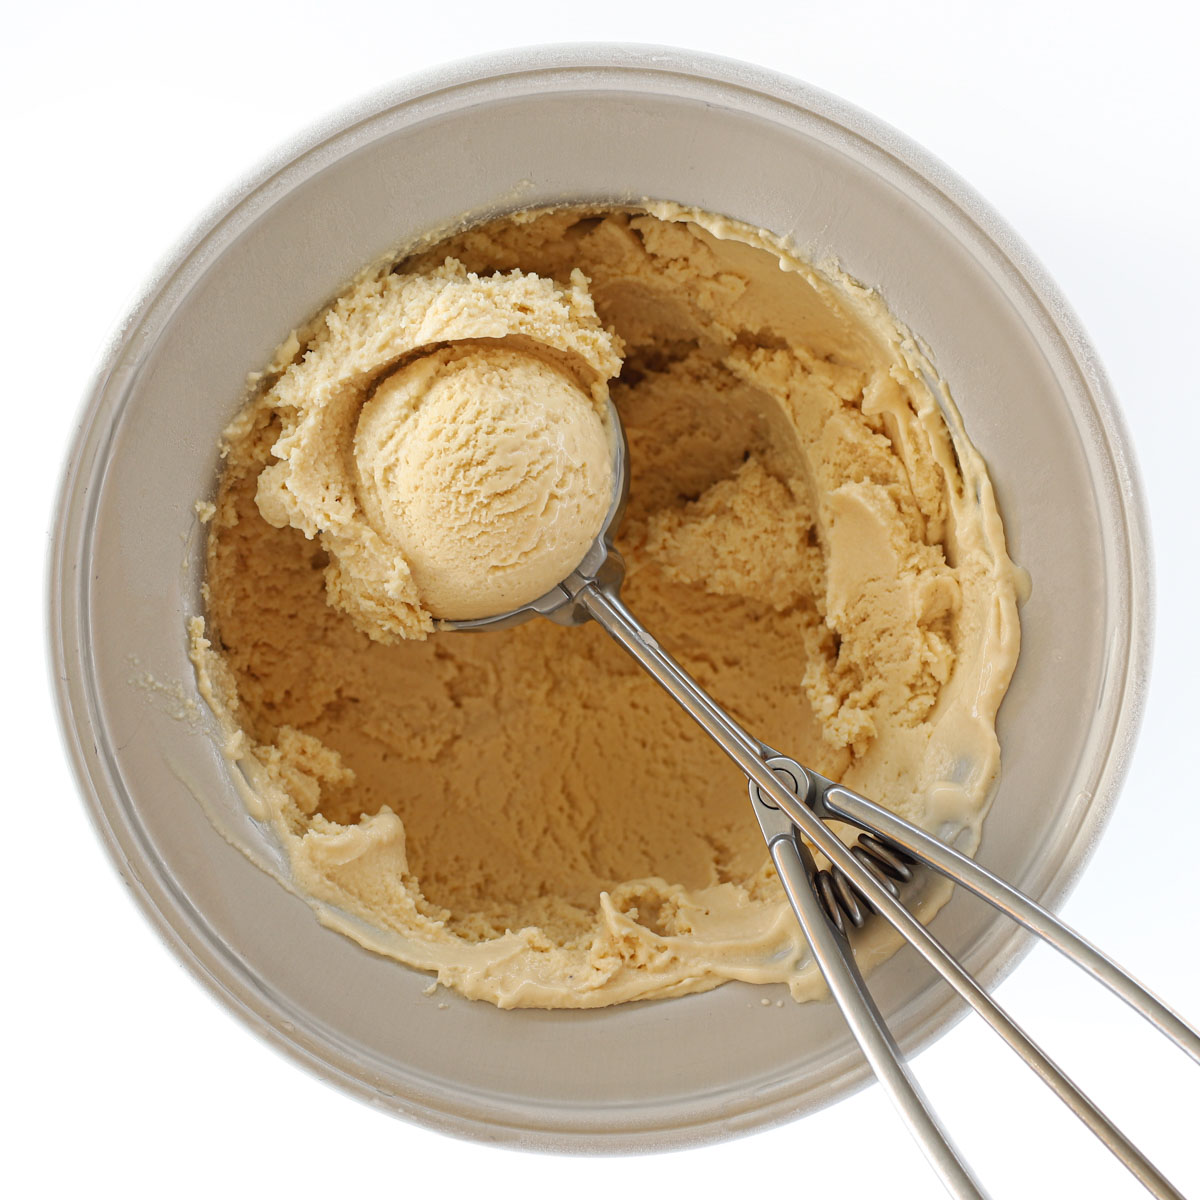 Featured photo for coffee ice cream with egg yolks, shows an ice cream maker bowl filled with coffee ice cream and on it there is scooped coffee ice cream in a scoop.